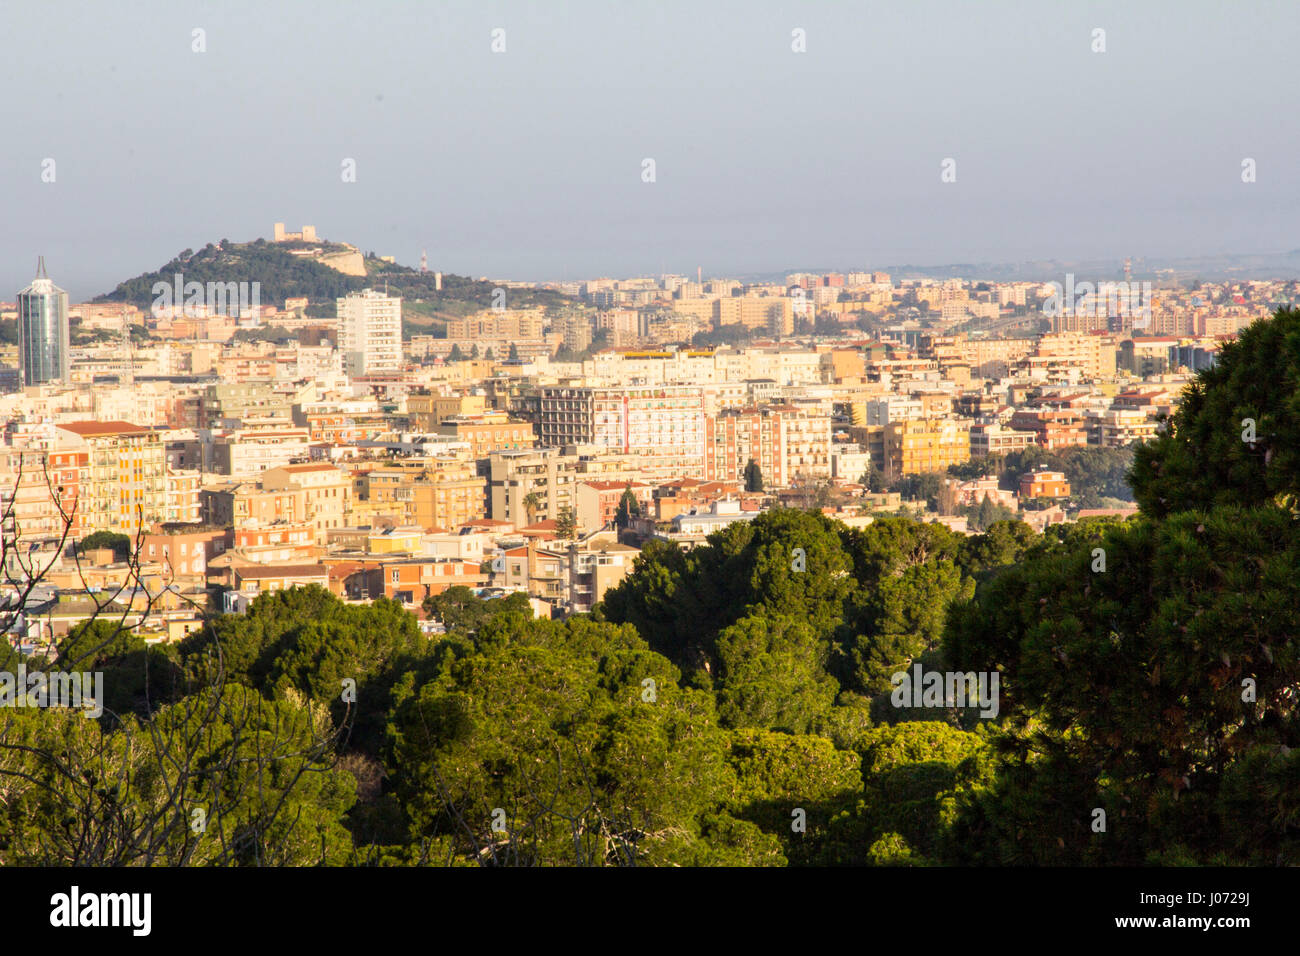 View of Cagliari, Sardinia from a hilltop scenic overlook. Stock Photo